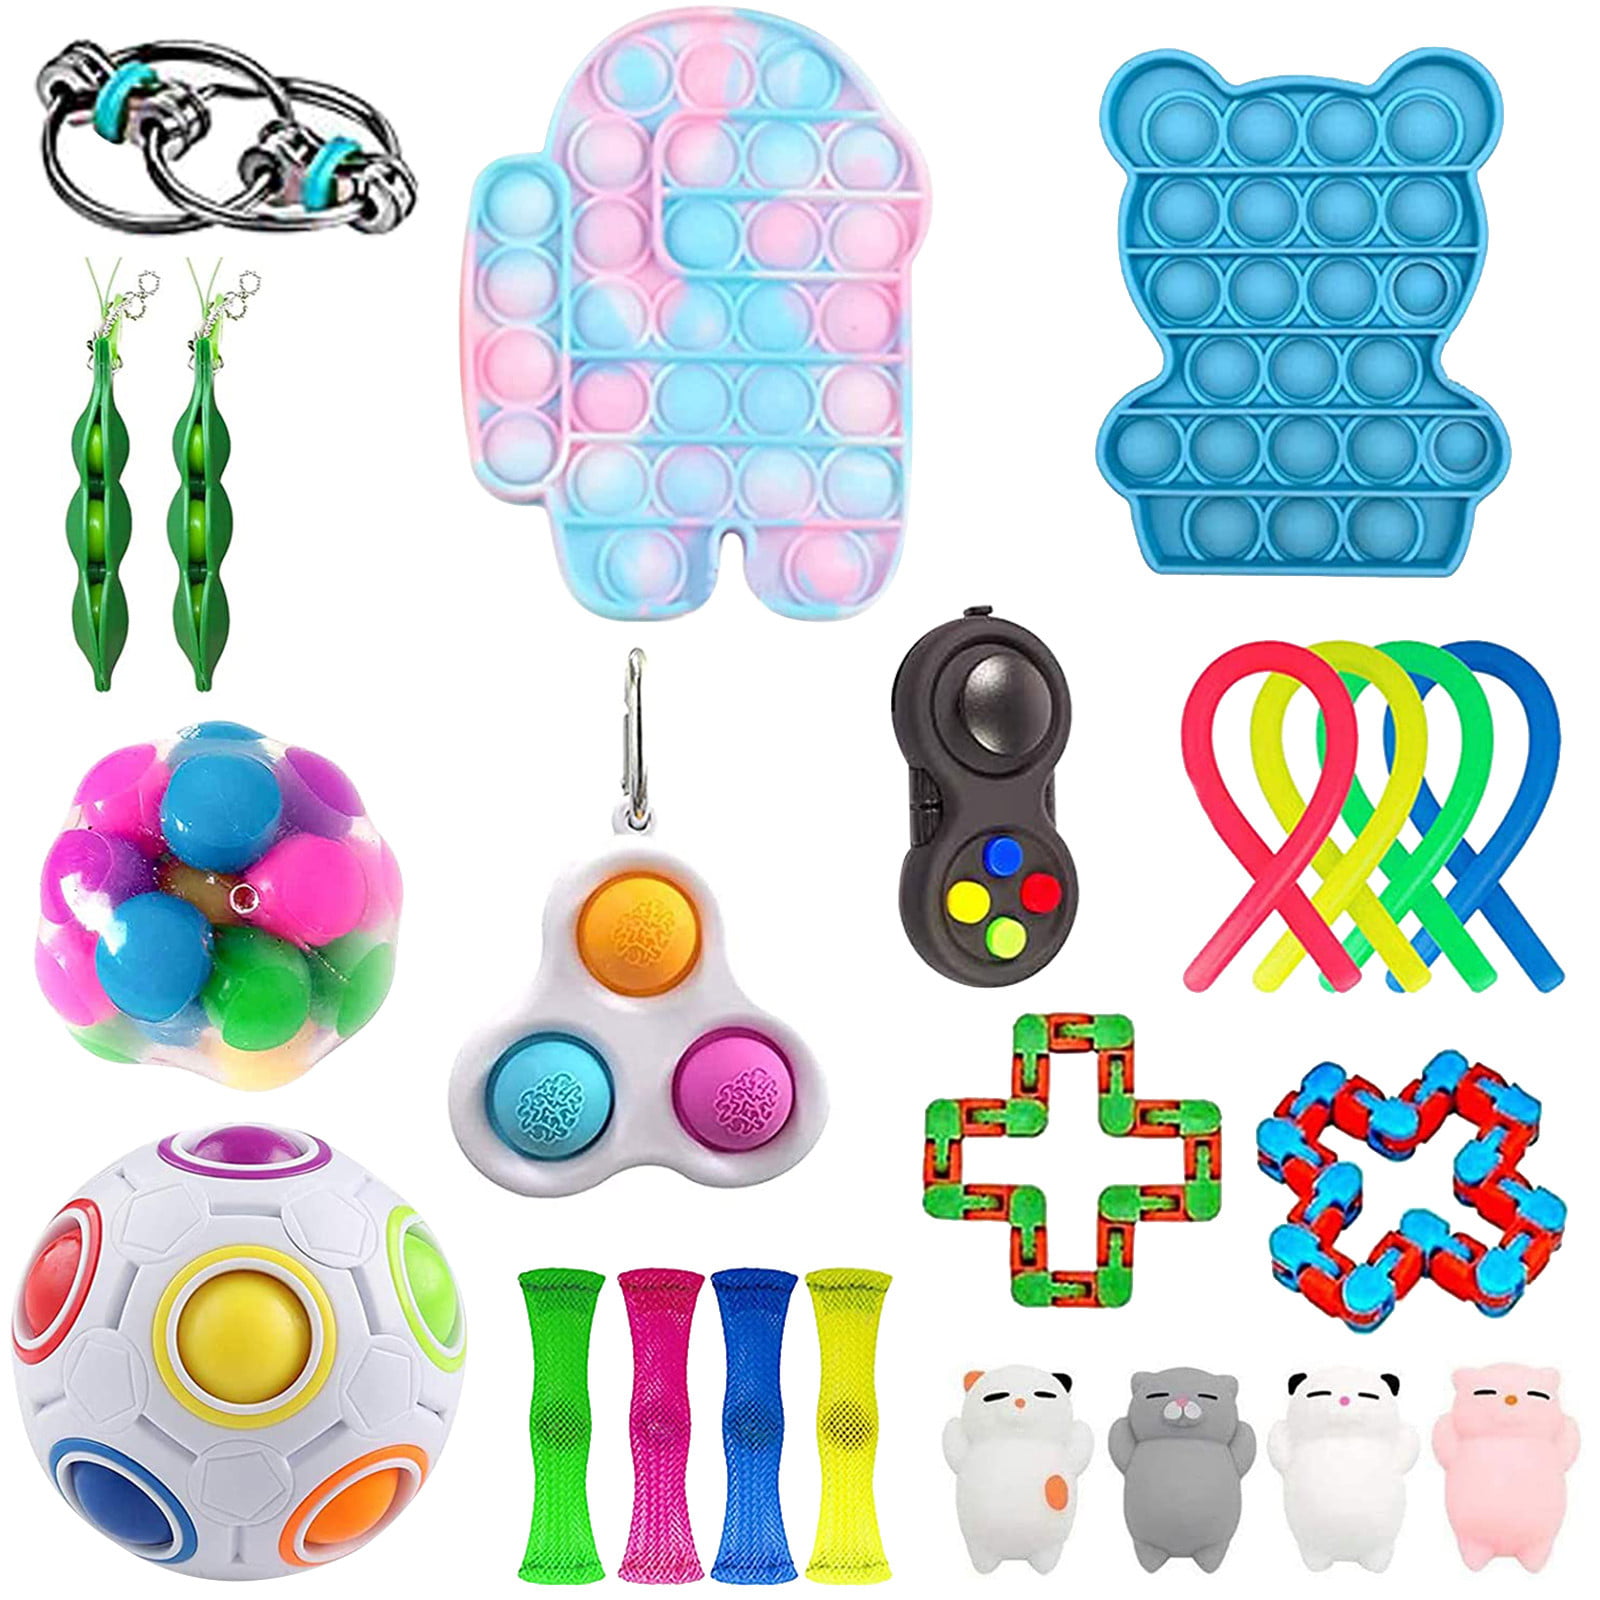 Mini Magnetic Labyrinth Sensory Educational toy for Special Needs ADHD Autism 